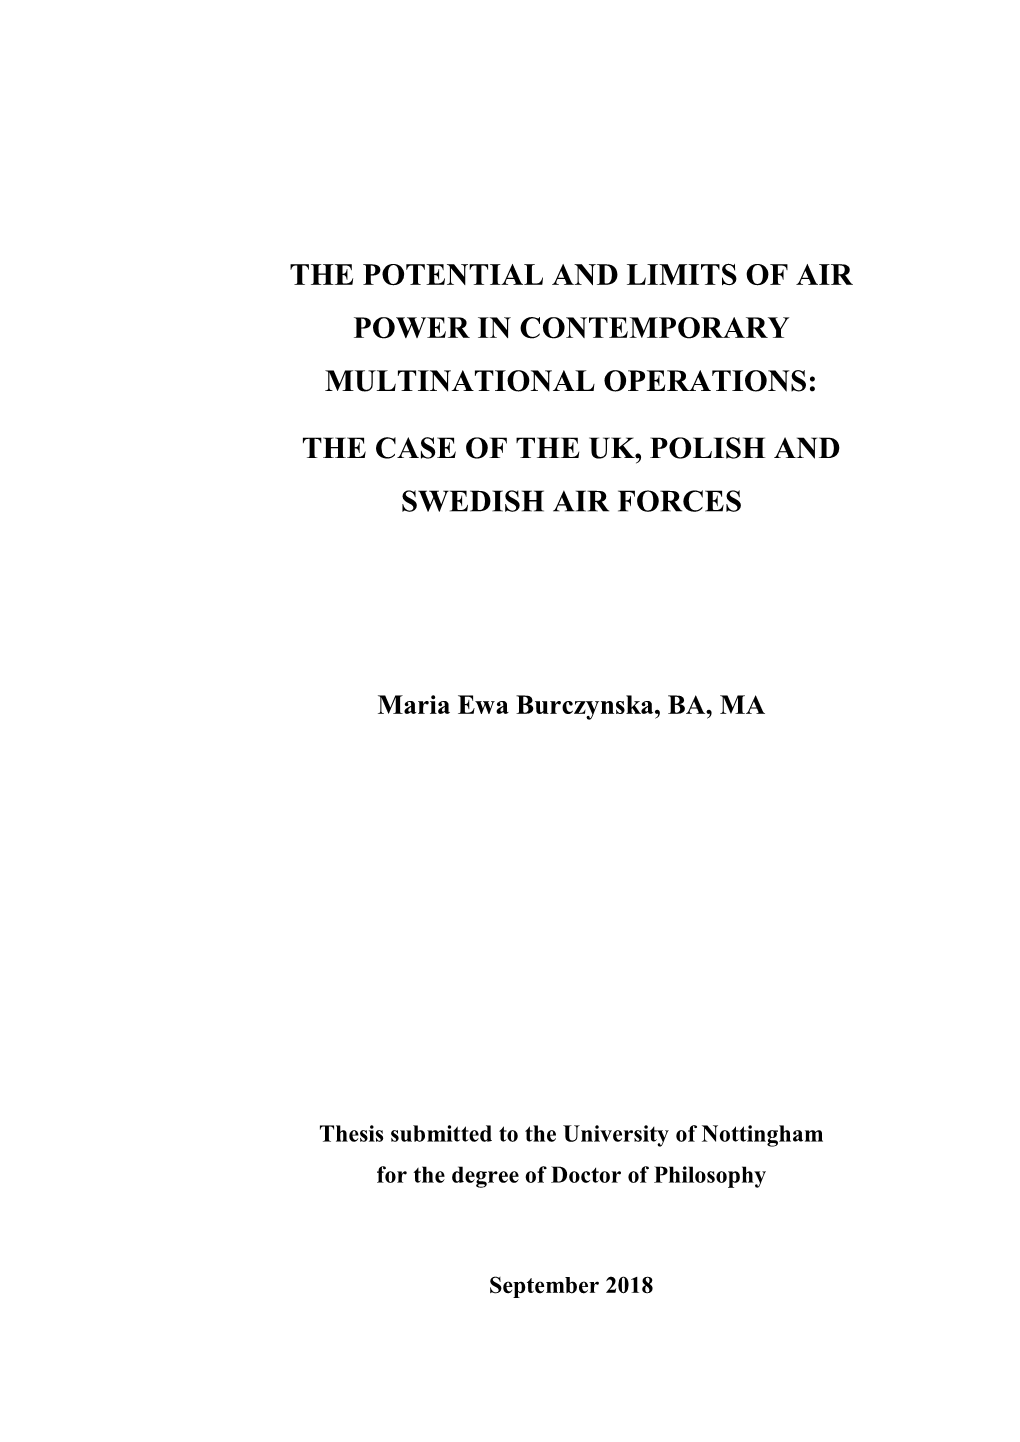 Burczynska, Maria Ewa (2019) the Potential and Limits of Air Power In